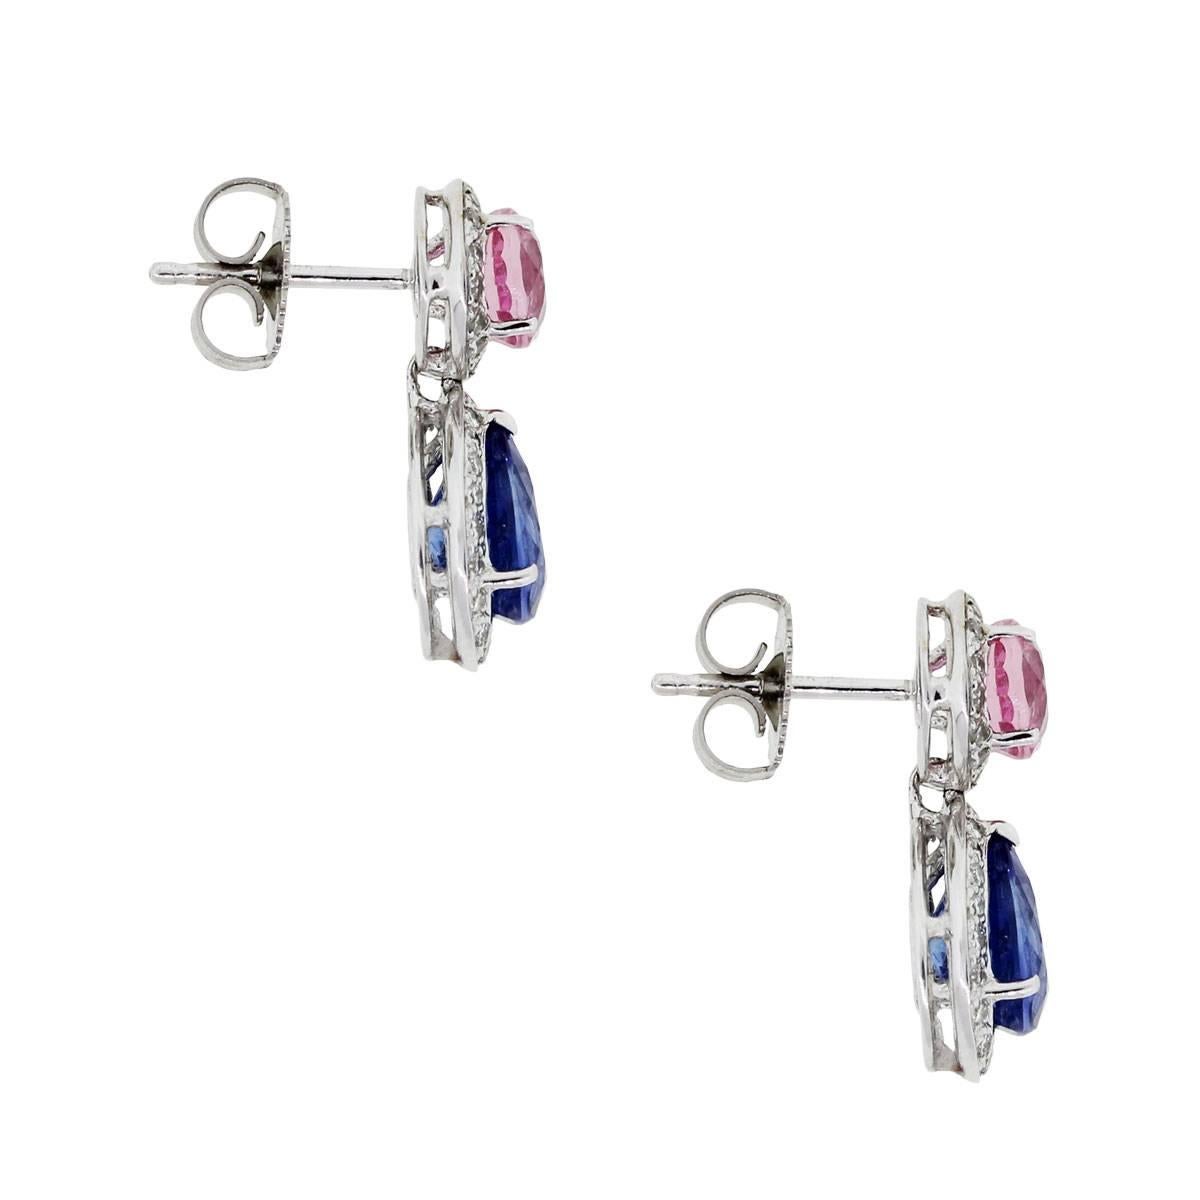 Material: 18k white gold
Diamond Details: Approximately 0.38ctw of round brilliant diamonds. Diamonds are H/I in color and SI in clarity
Gemstone Details: Round shape 2.24ctw pink sapphires and 3.32ctw pear shape blue sapphire
Earring Measurements: